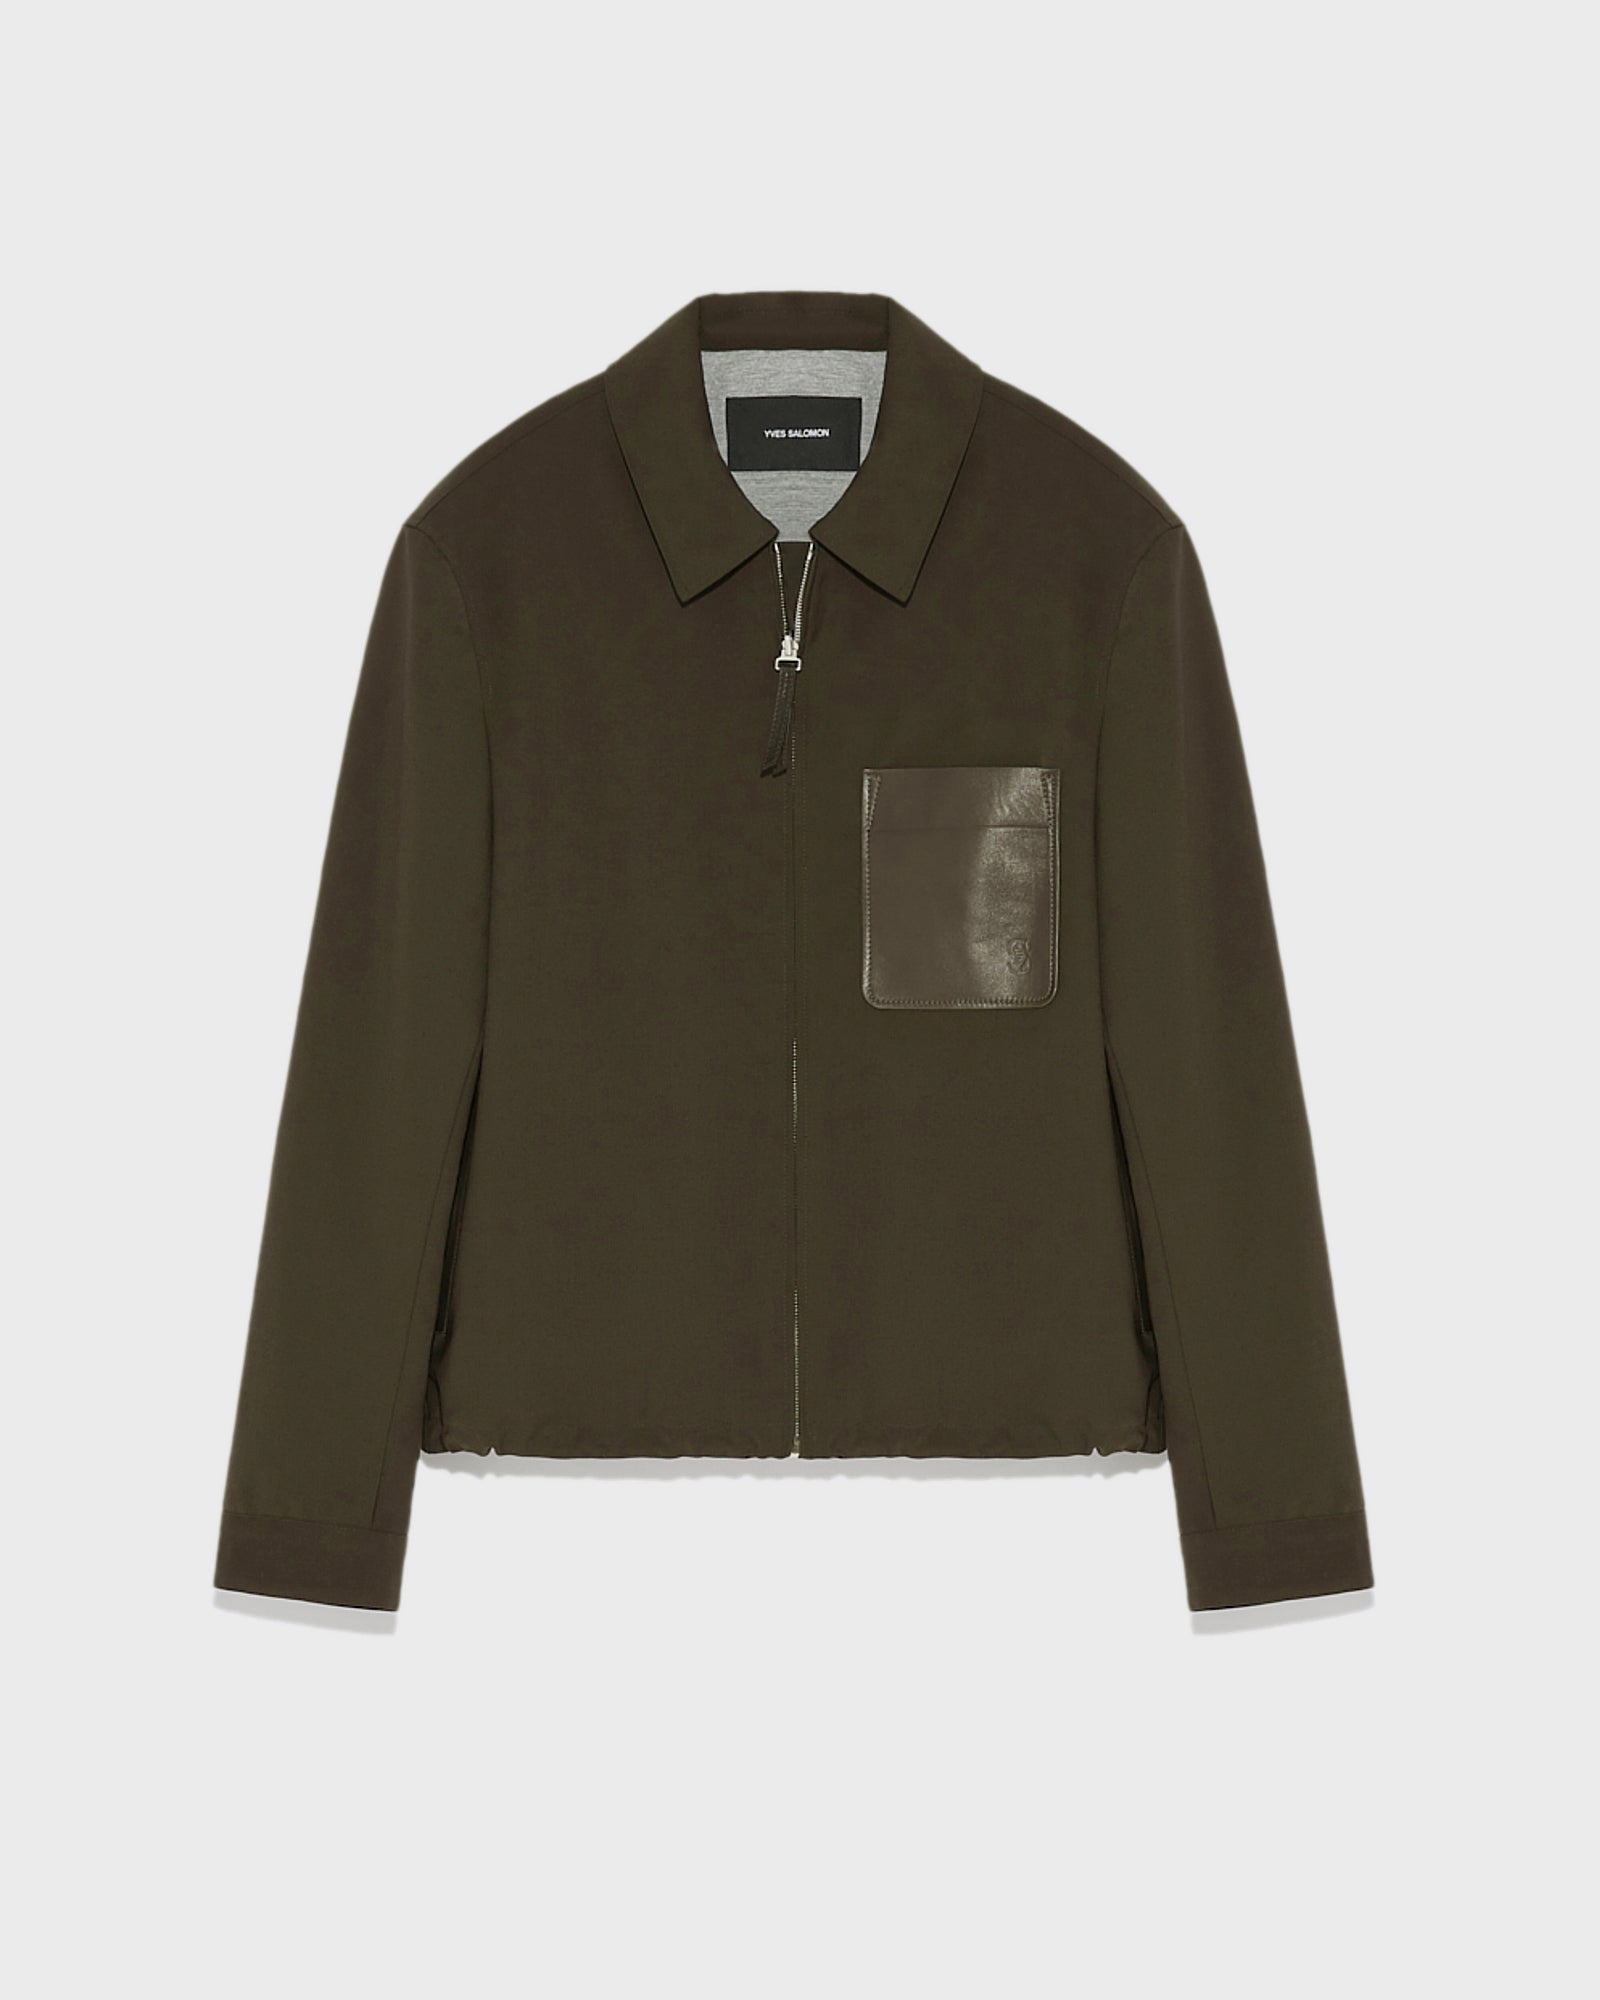 Sale Preview | Men's Coats and Jackets – Yves Salomon US